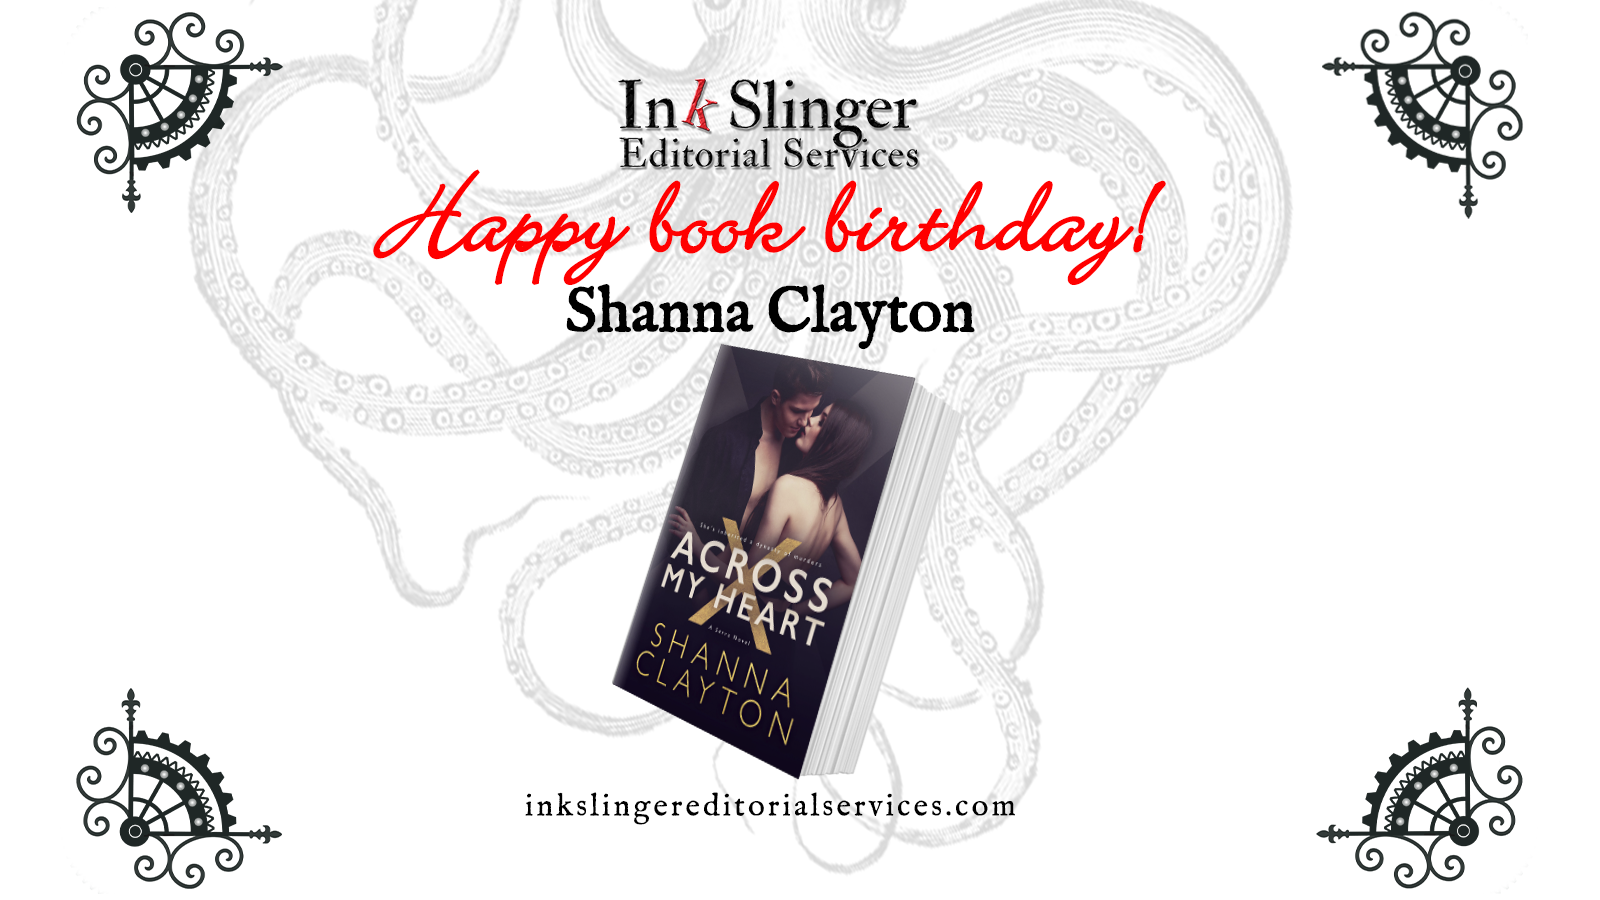 Ink Slinger Editorial Services wishes Shanna Clayton a happy book birthday. An image of the book sits in the center. Steampunk elements are in the 4 corners, and the background is white with faint octopus tentacles.